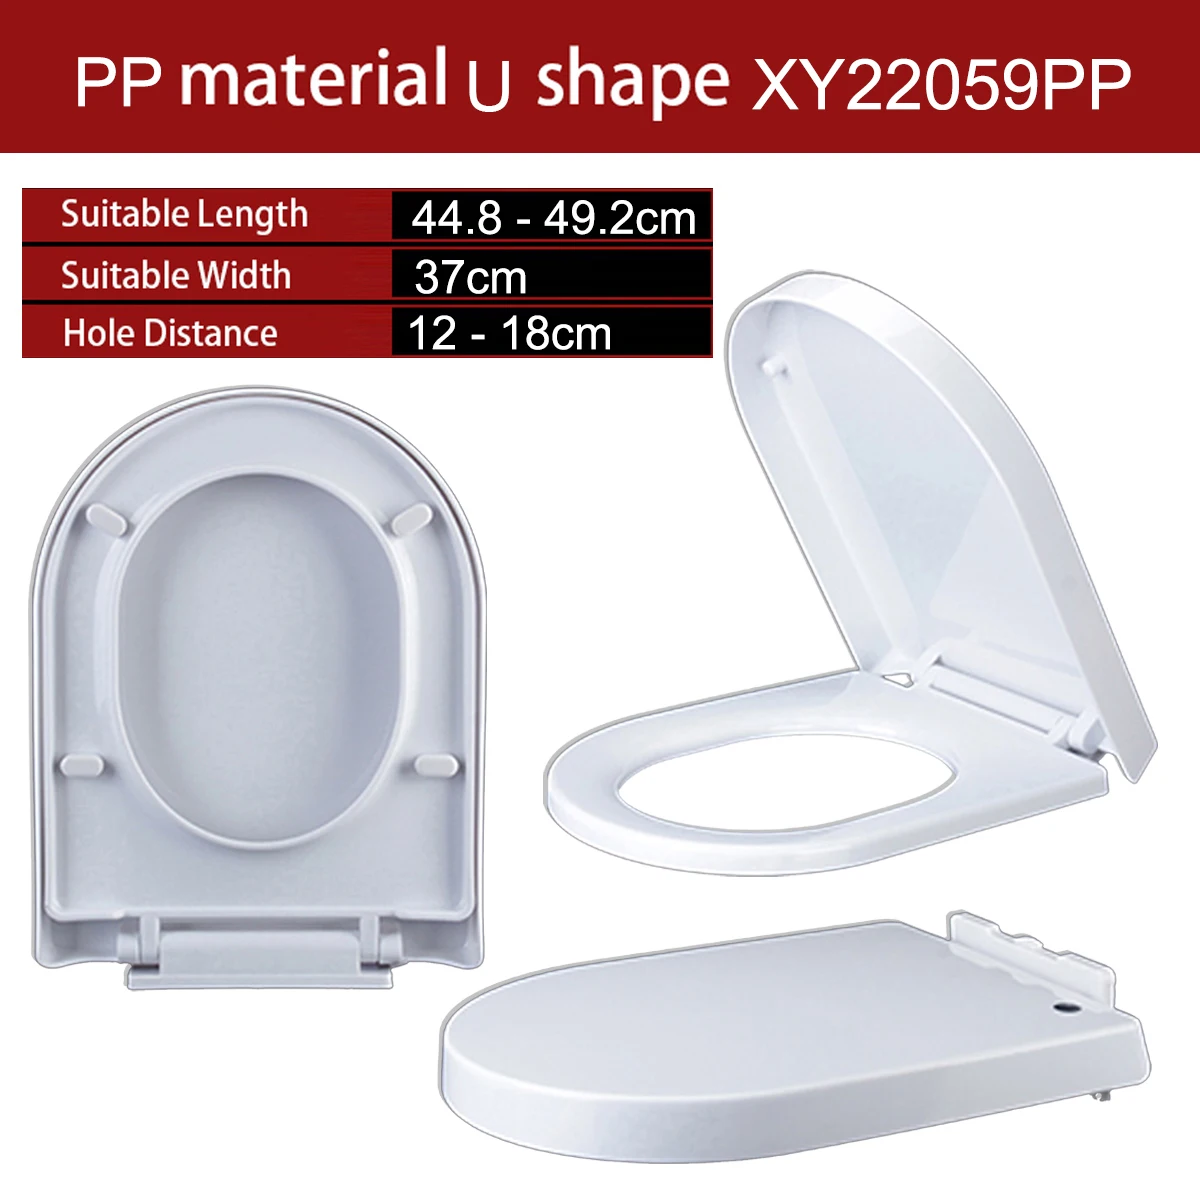 Universal U Shape Elongated Slow Close WC Toilet Seats Cover Bowl Lid Top Mounted Quick Release PP Board Soft Closure XY22059PP